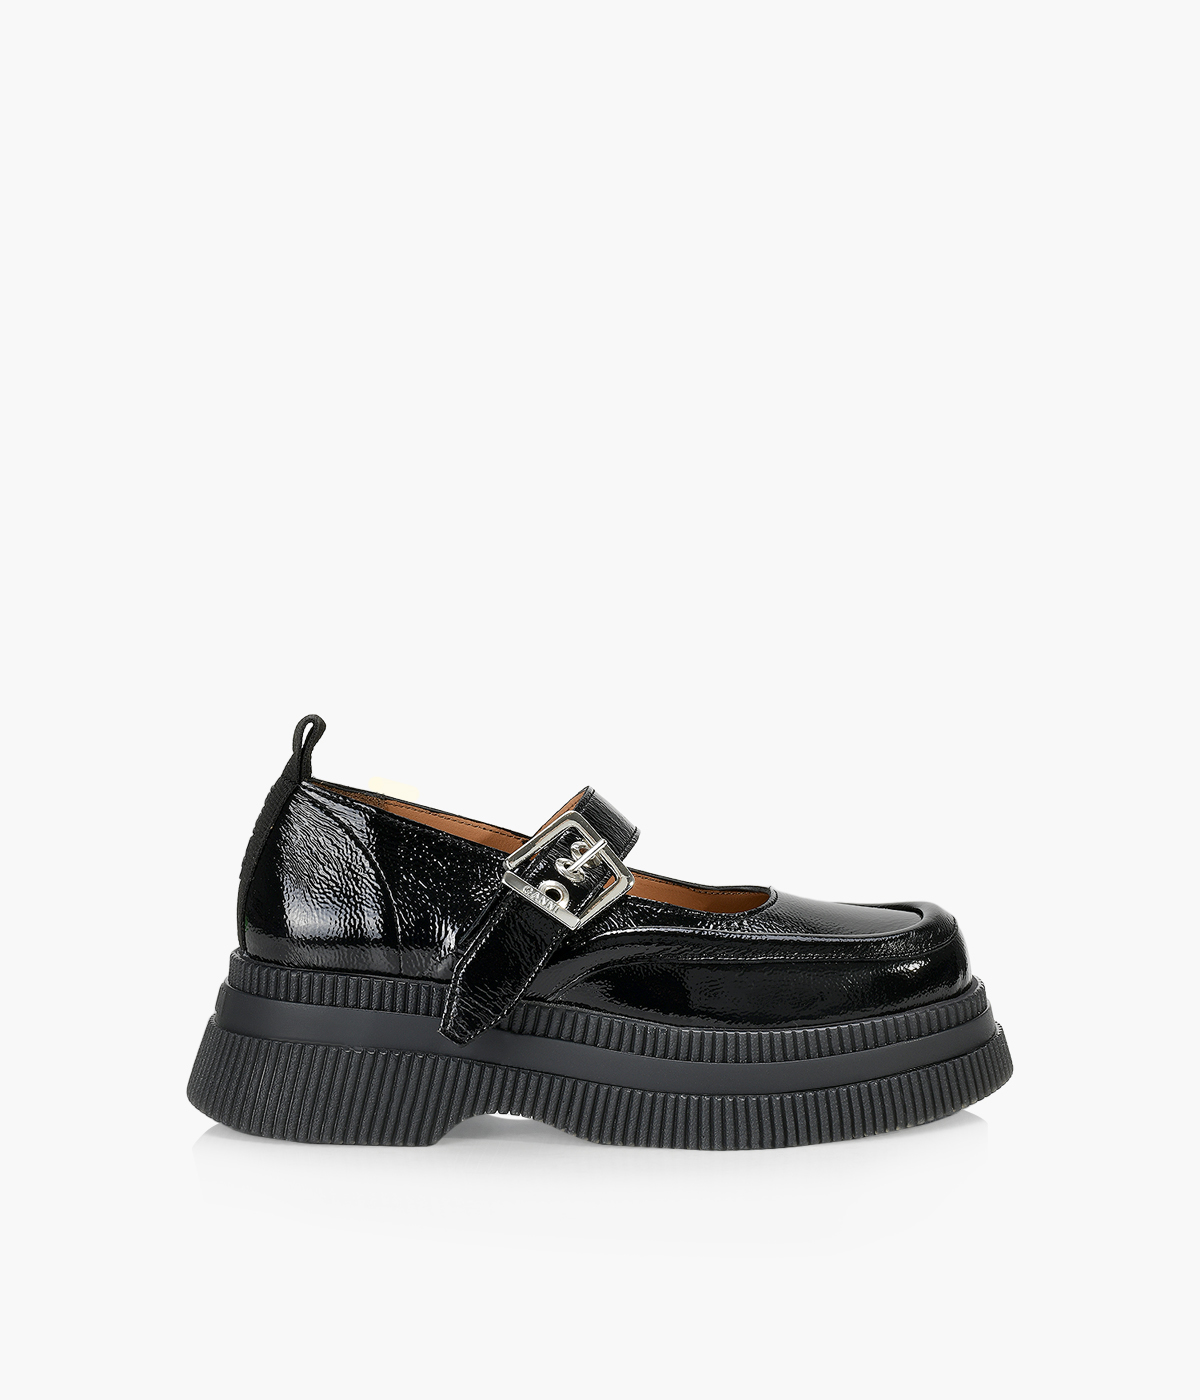 GANNI CREEPERS MARY JANE - Black Patent Leather | Browns Shoes